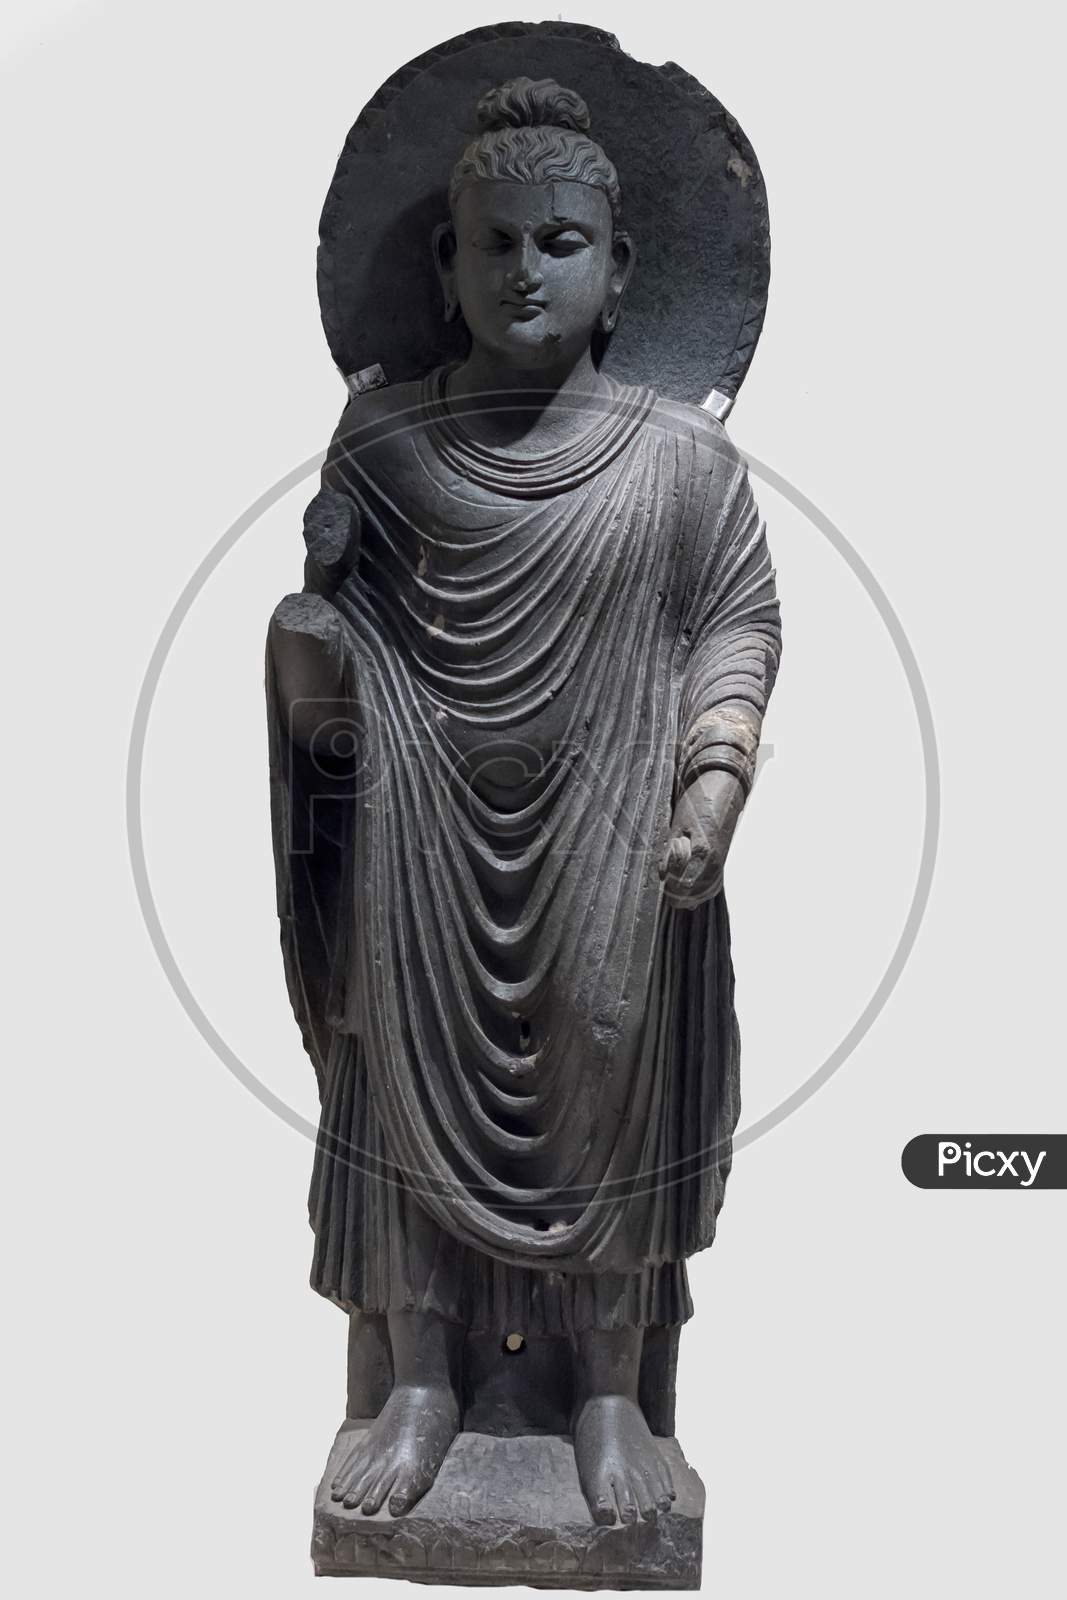 Archaeological Sculpture Standing Of Buddha In Meditation From Indian Mythology